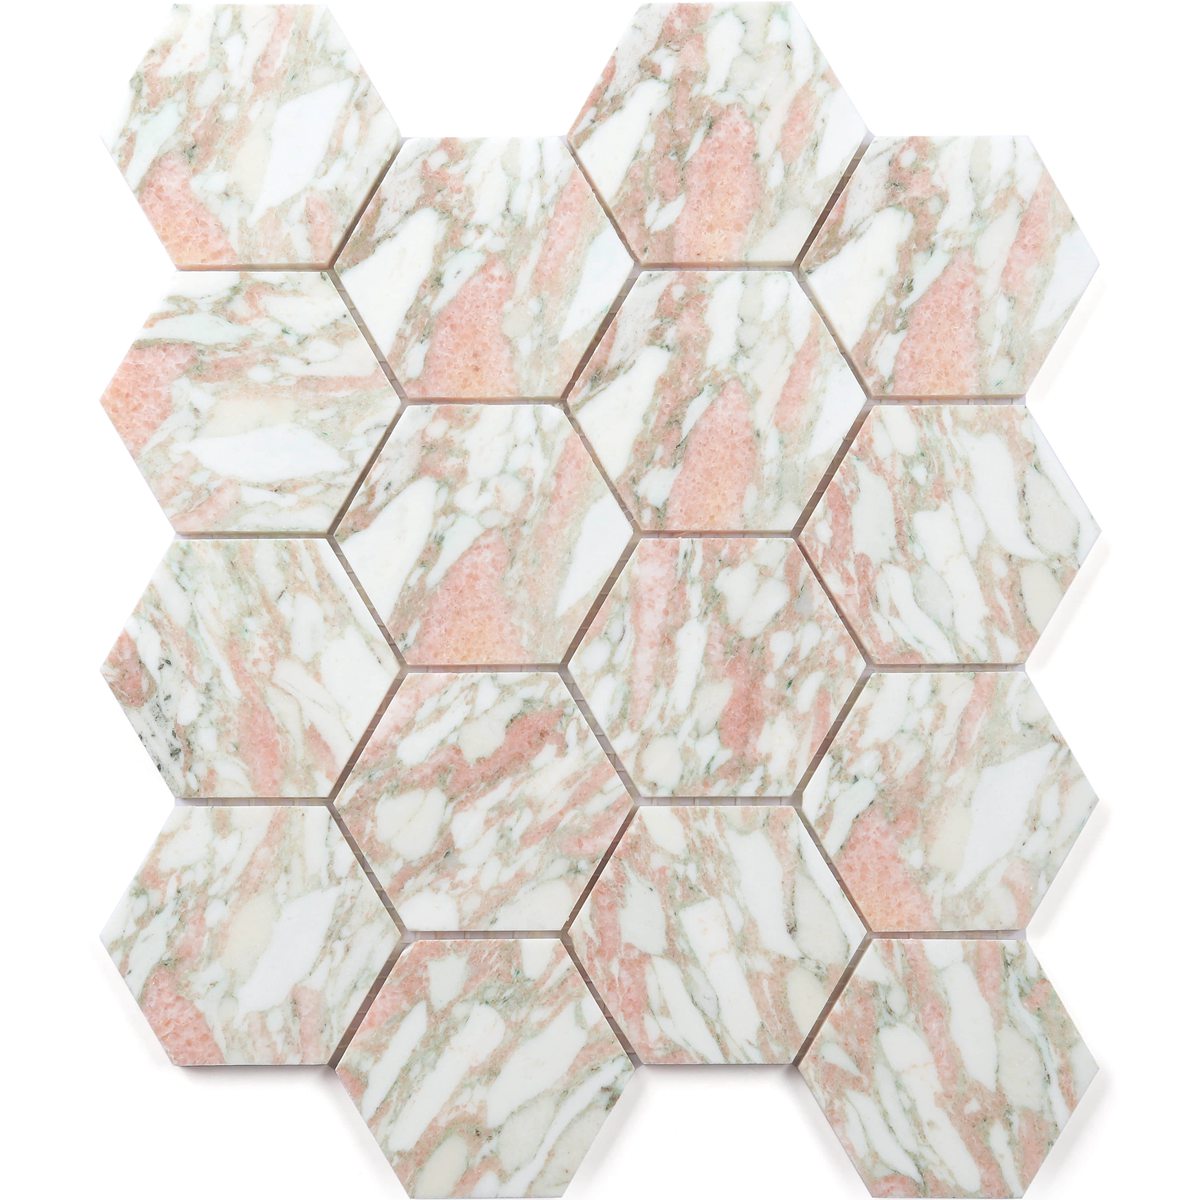 Hotel Durable Mix Color Marble Stone Tile